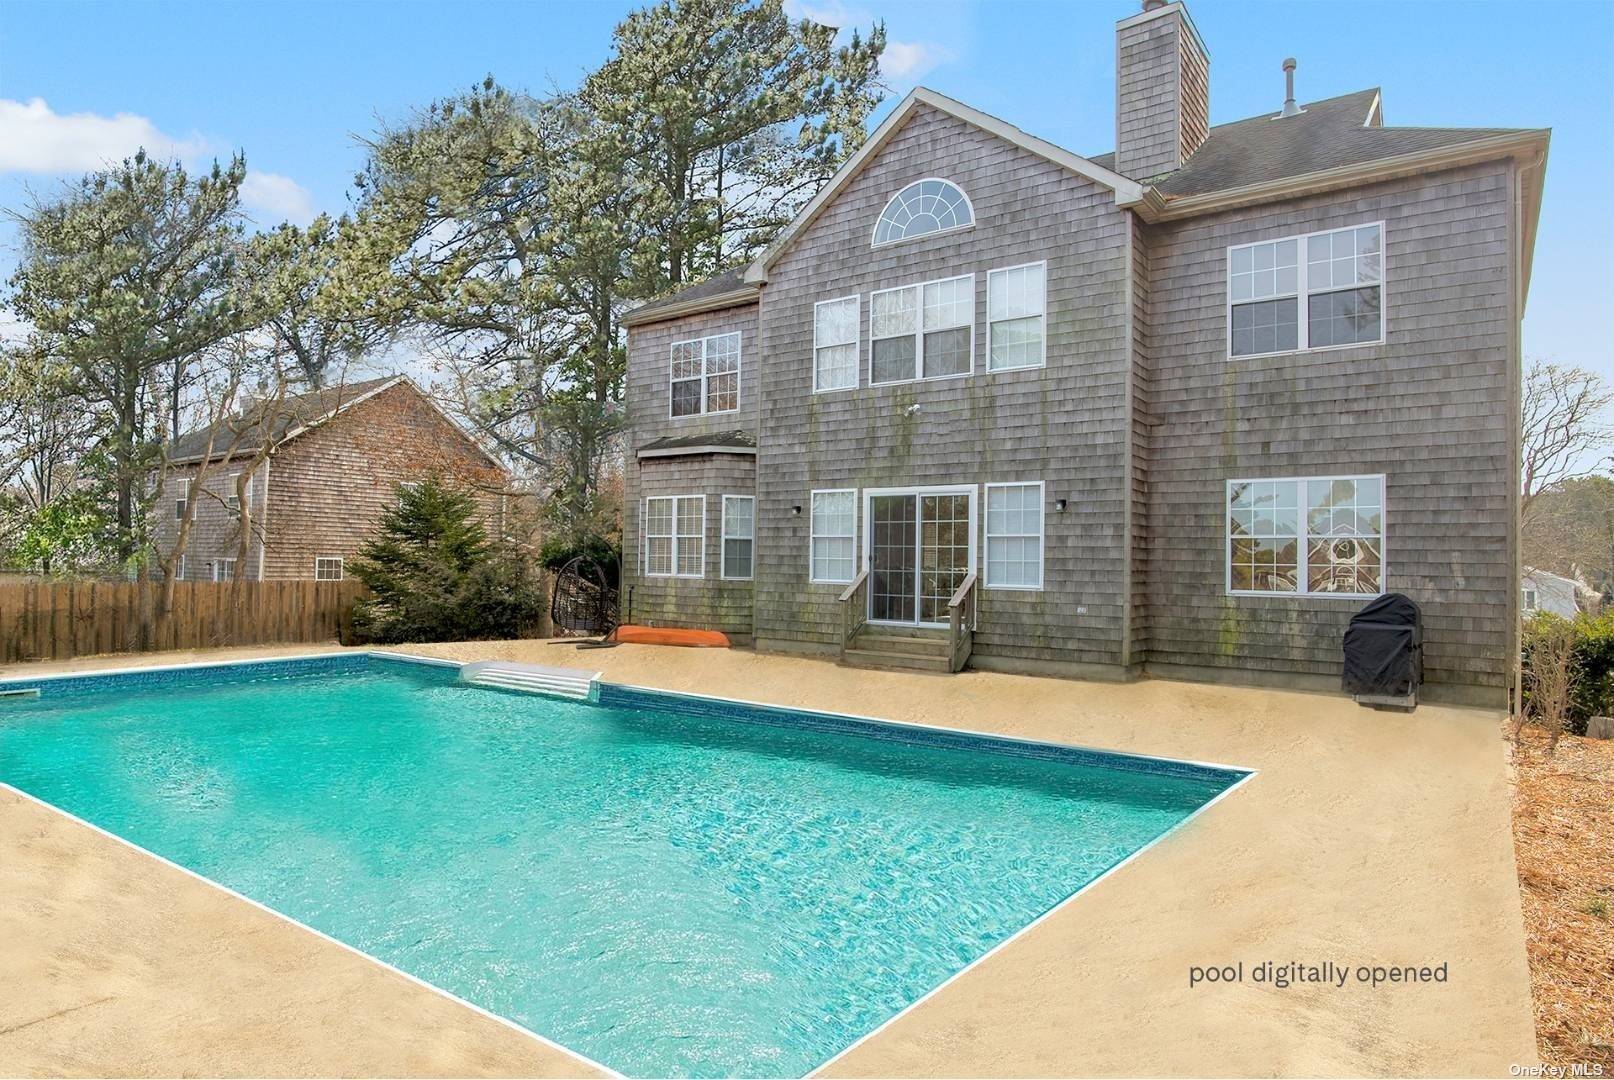 Enjoy your summer in this recently renovated Hamptons home, located just minutes from bay and ocean beaches, Southampton Village amenities, and a world class golf course.